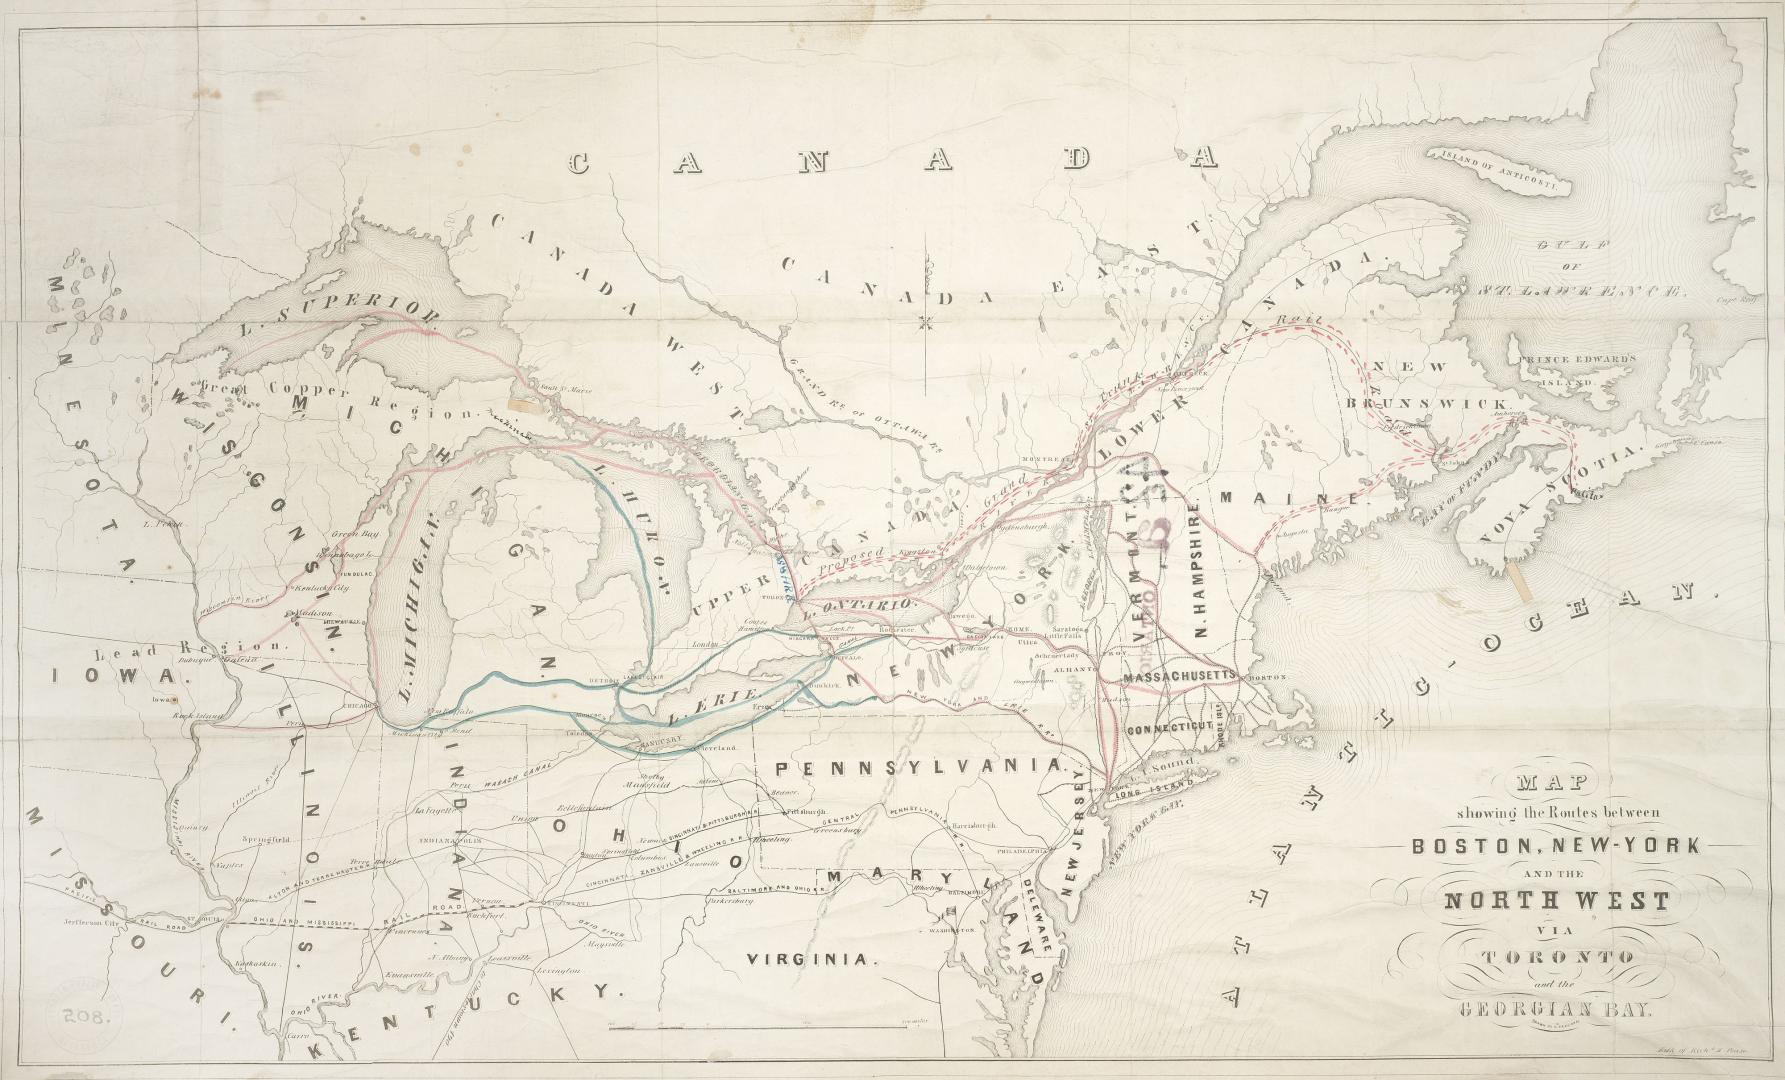 Map showing the routes between Boston, New-York and the North West via Toronto and the Georgian Bay